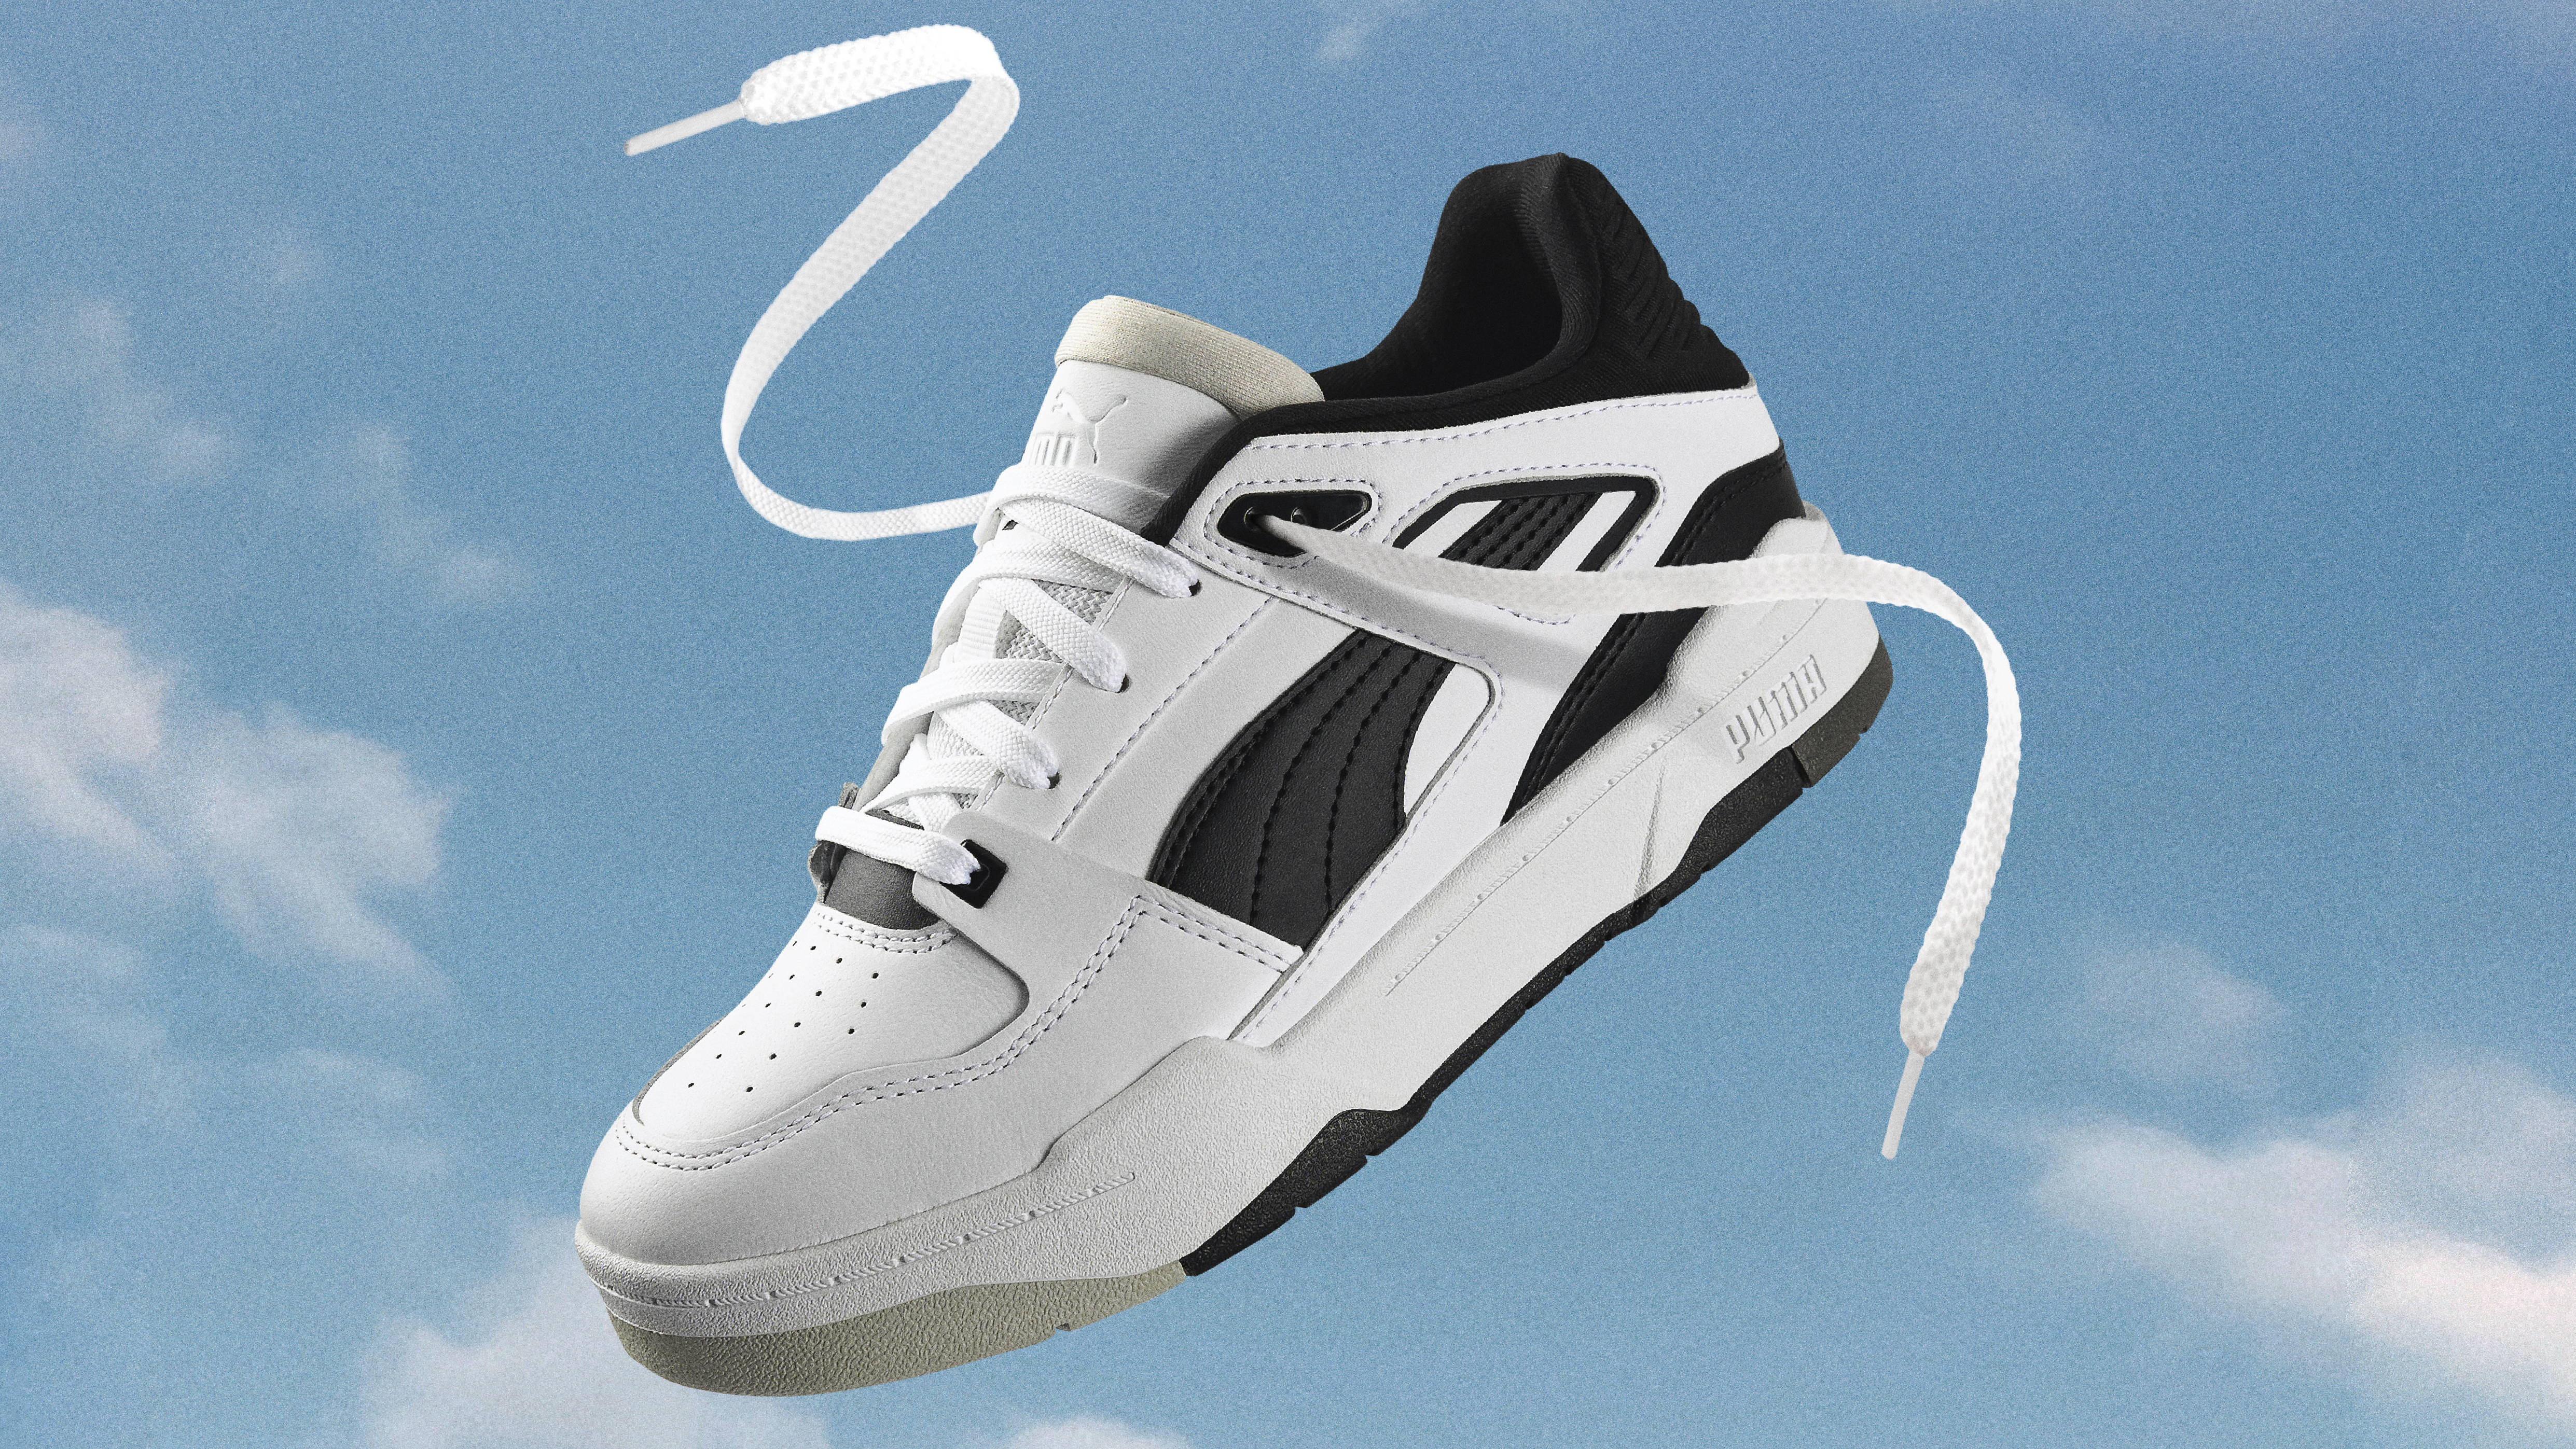 Is Louis Vuitton Copying the Puma Slipstream? 